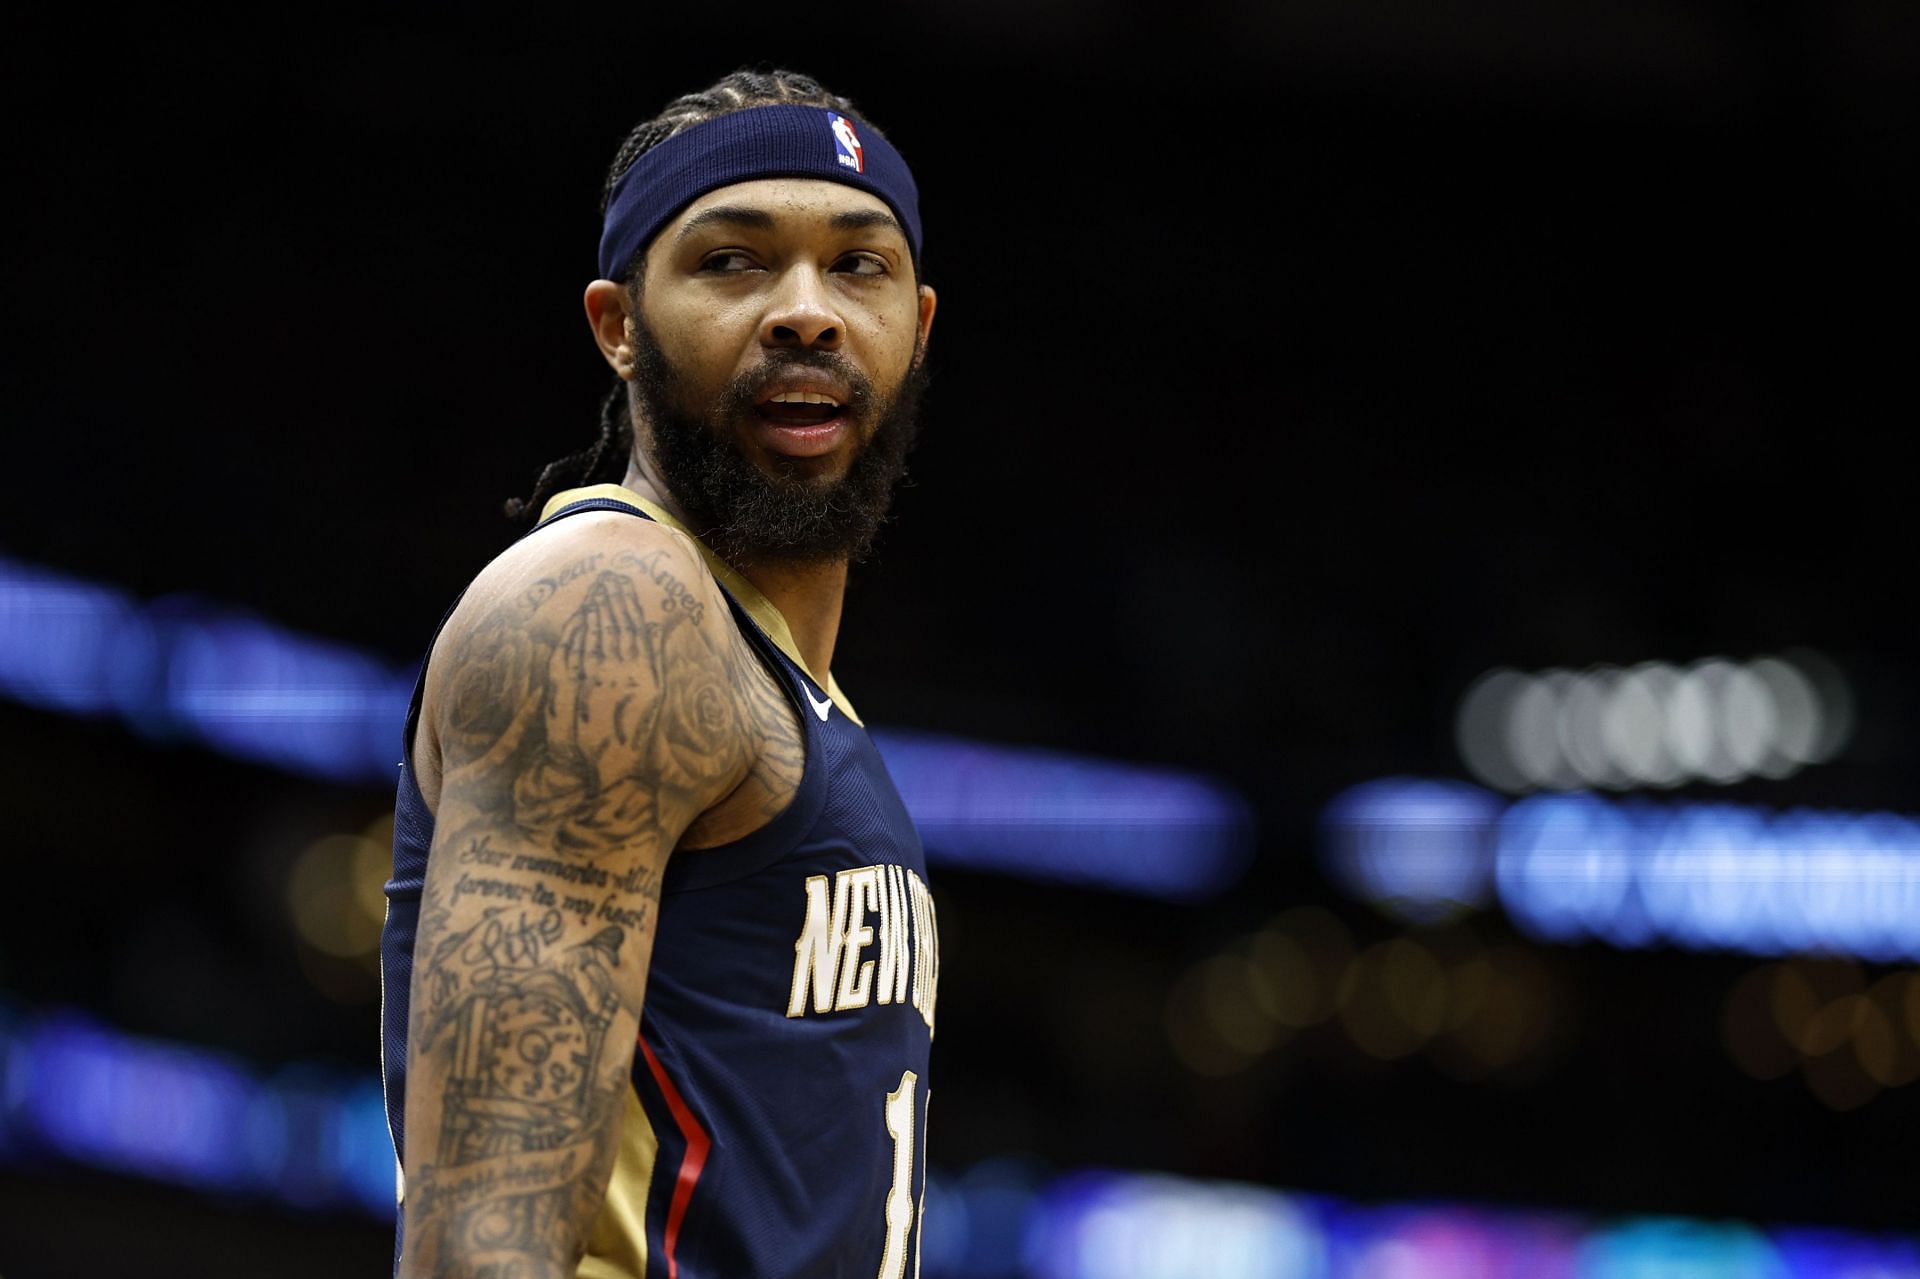 NBA News Today: Brandon Ingram returns from 29-game absence, Steven Adams ruled out for 3-5 weeks, and more